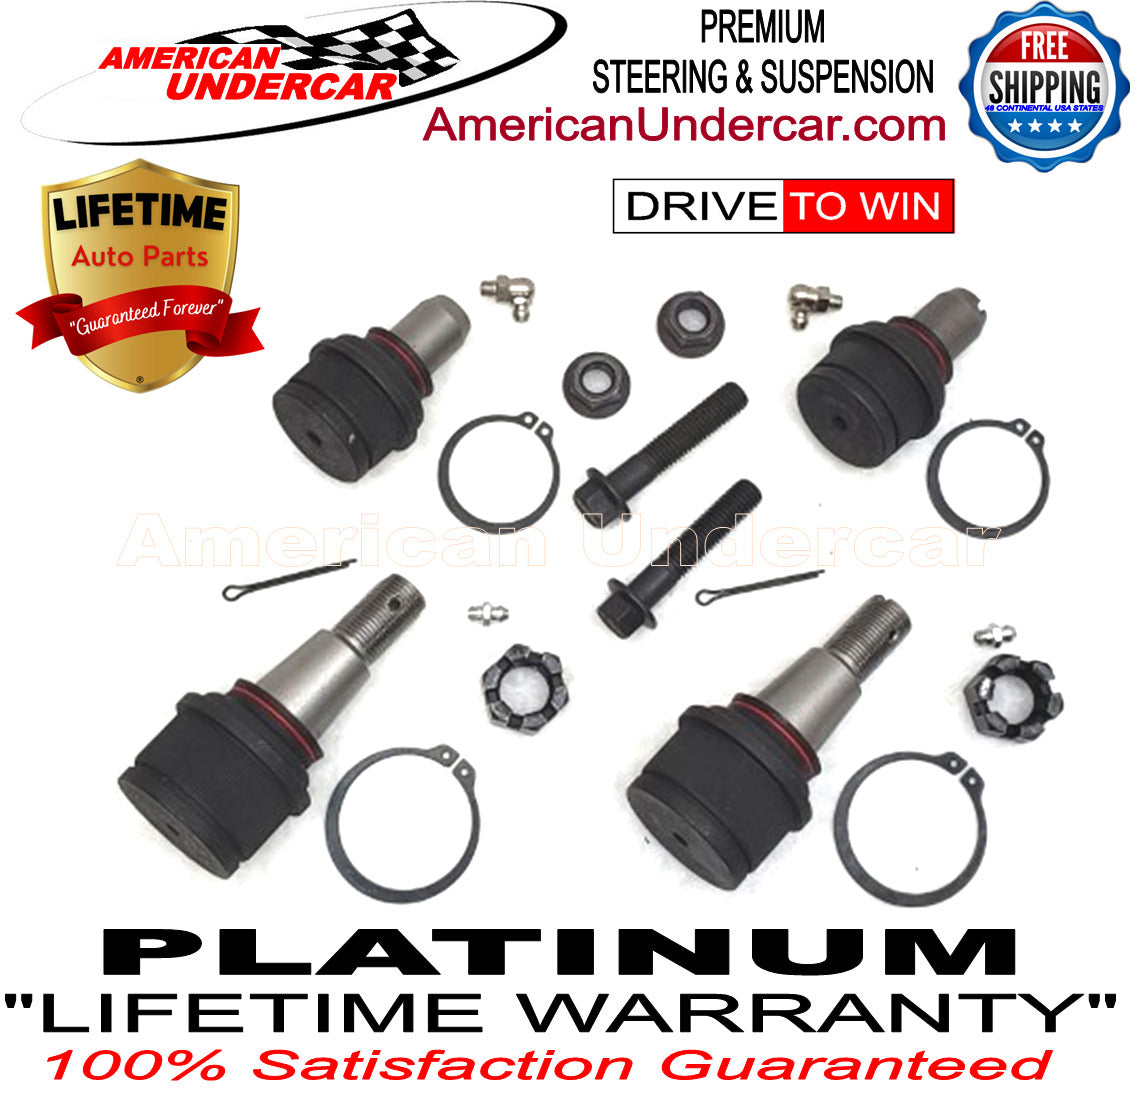 Lifetime Ball Joints Upper and Lower Suspension Kit for 1999-2019 Ford E450 2WD